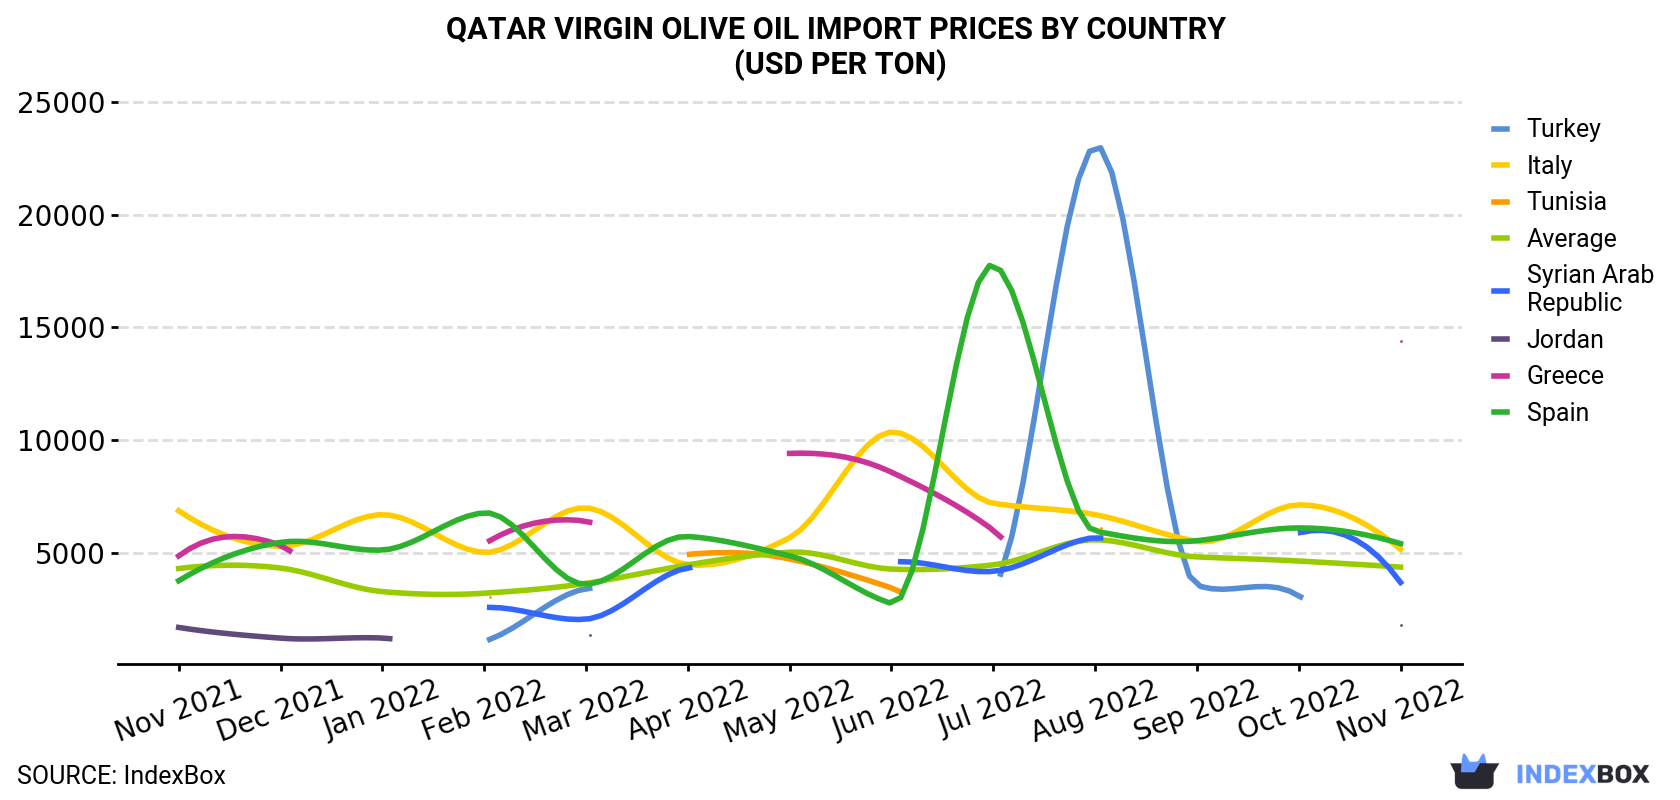 Qatar Virgin Olive Oil Import Prices By Country (USD Per Ton)